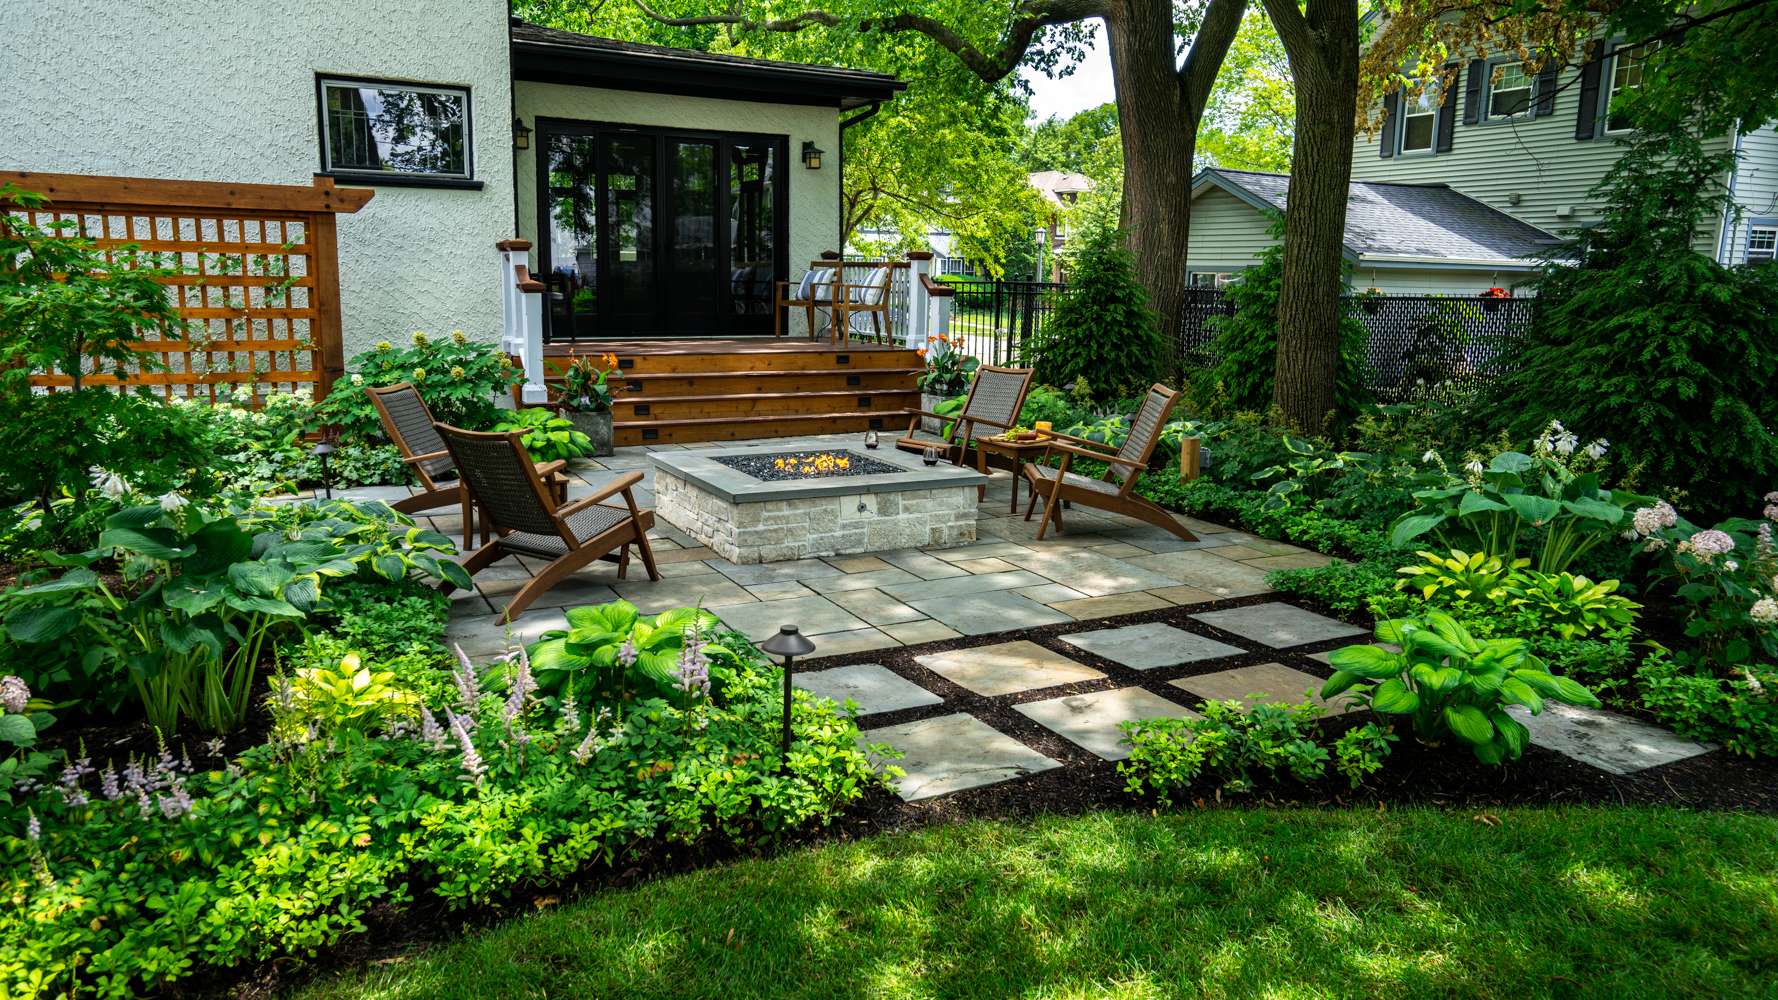 6 Key Considerations When Designing a Backyard Fire Pit